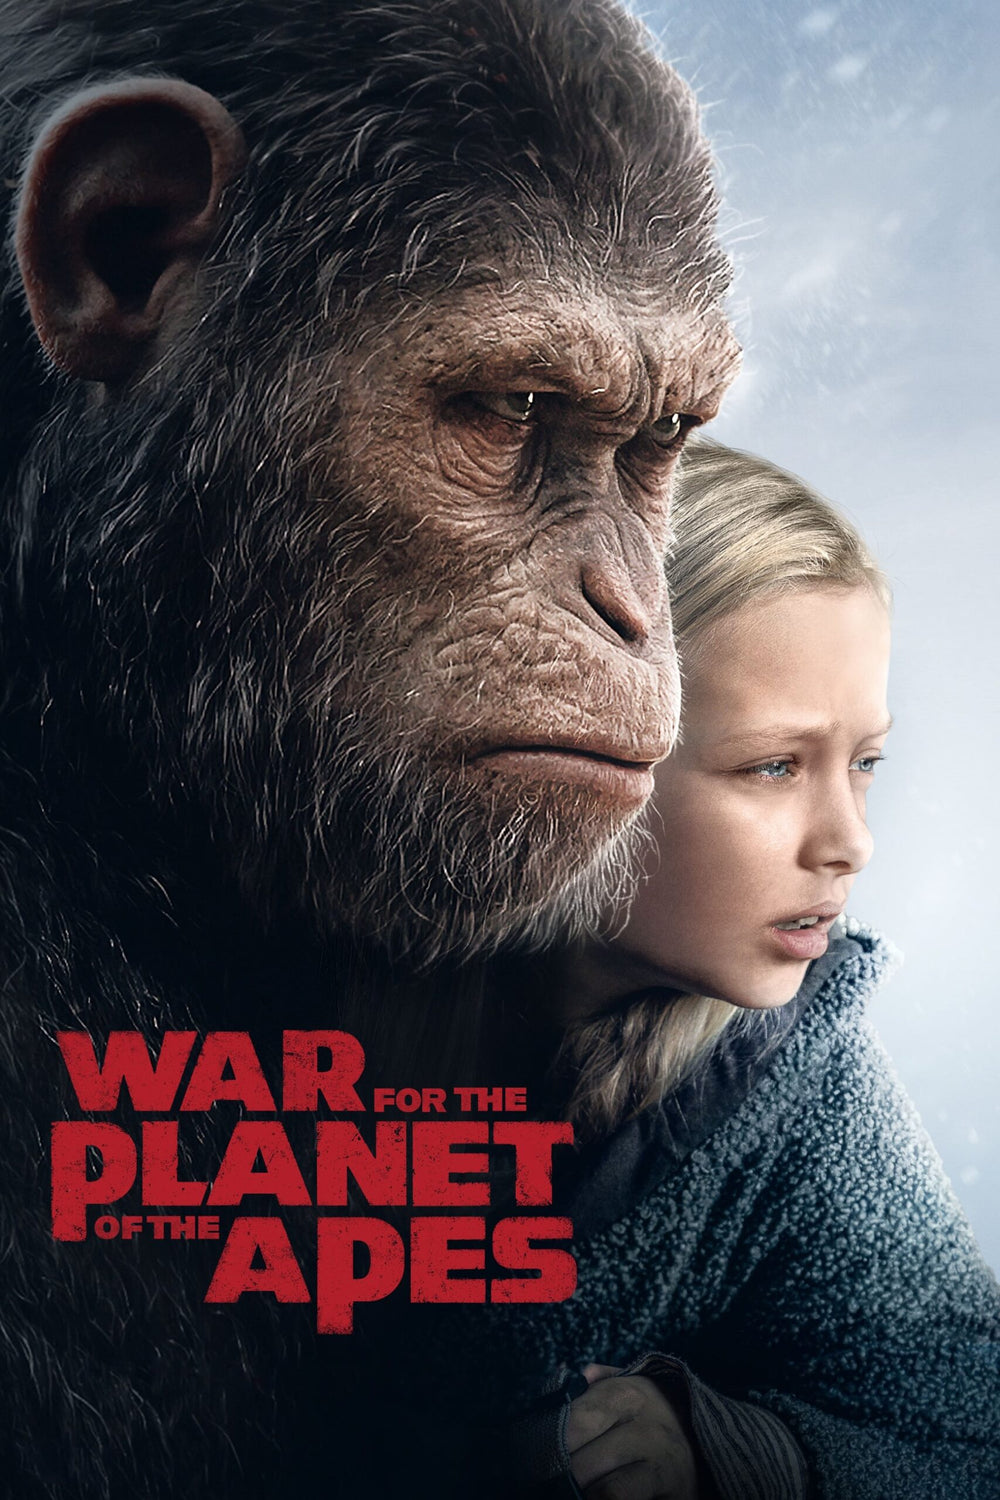 WAR FOR THE PLANET OF THE APES HD Vudu/iTunes Via Moviesanywhere